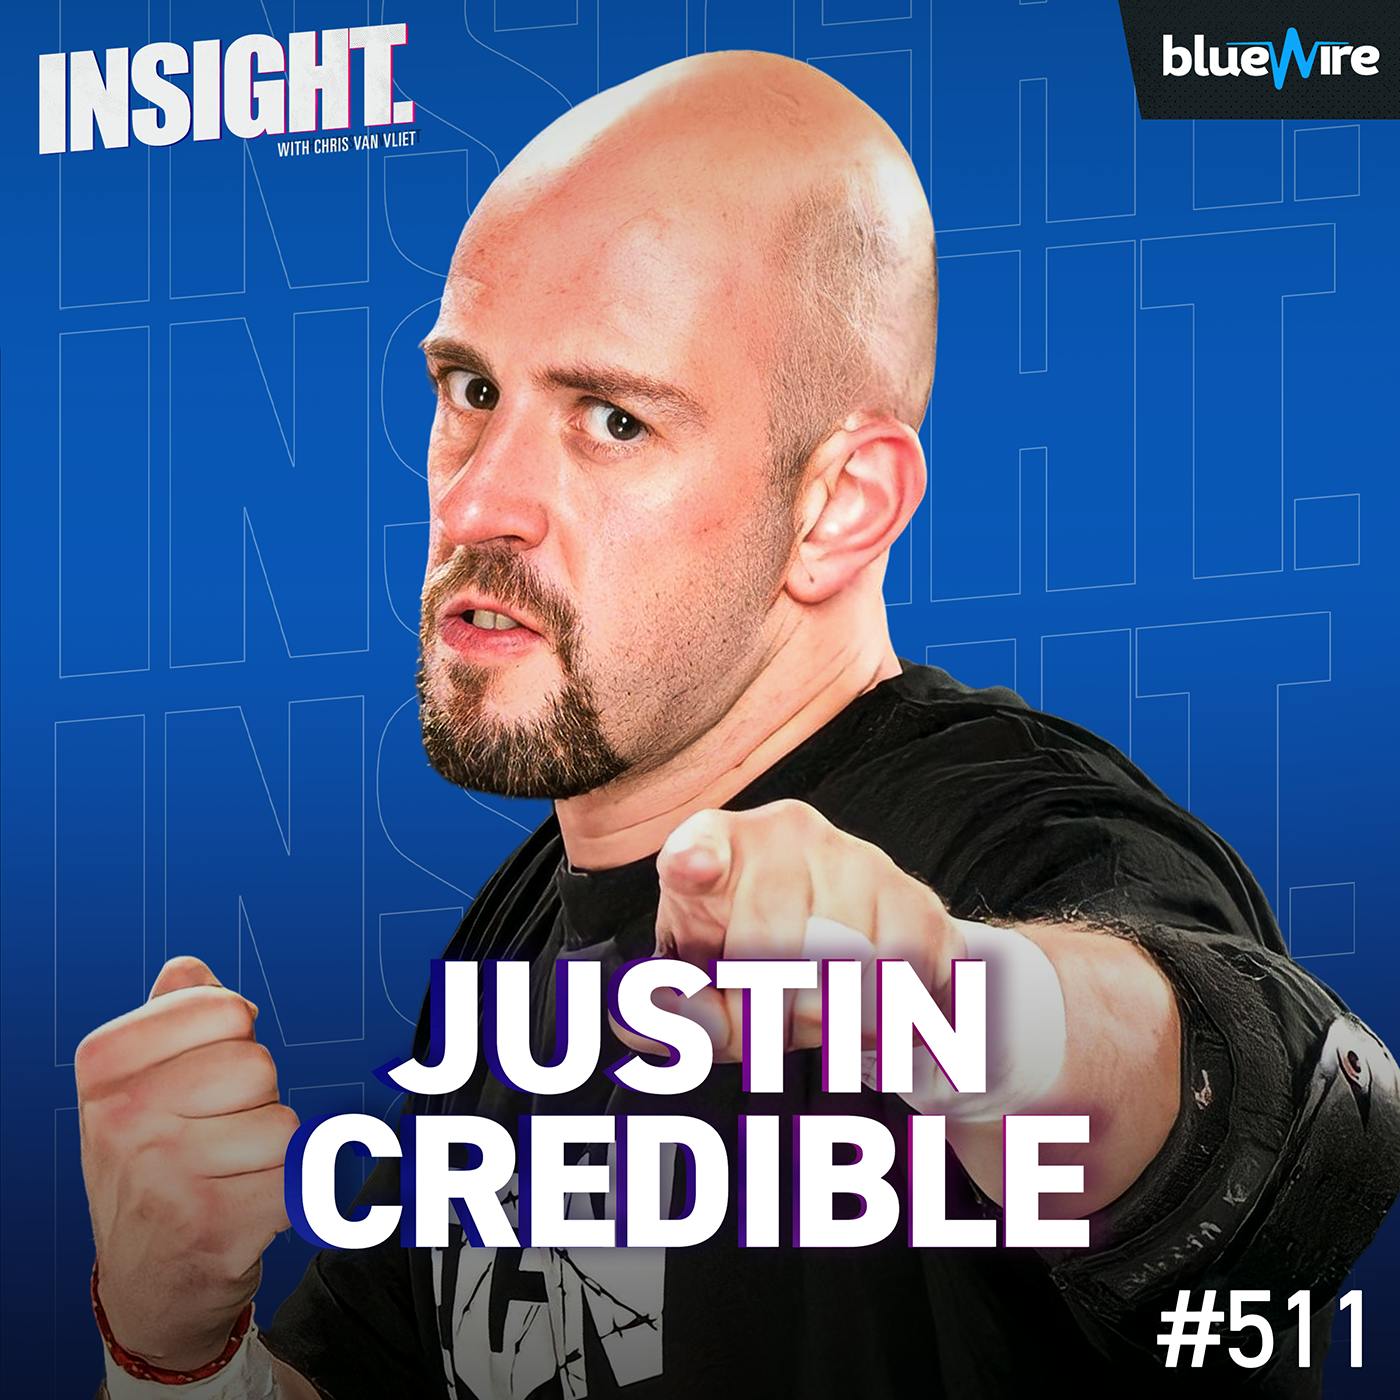 Justin Credible On Battling Addiction, Why AEW Is Like ECW, Getting Fired From WWE - Interview from December 2019